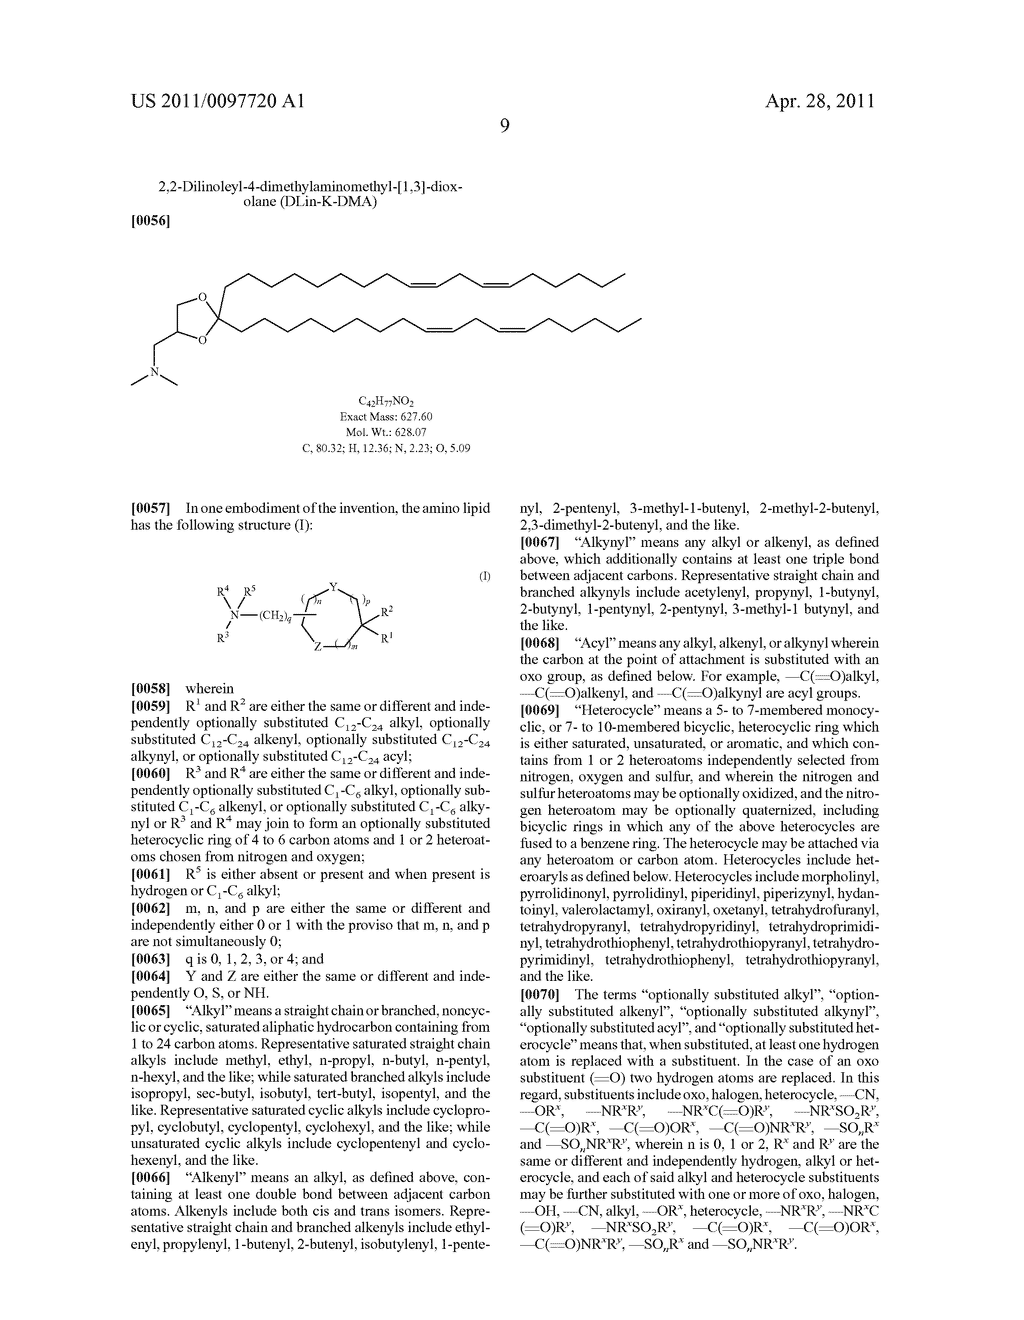 SCREENING METHOD FOR SELECTED AMINO LIPID-CONTAINING COMPOSITIONS - diagram, schematic, and image 10